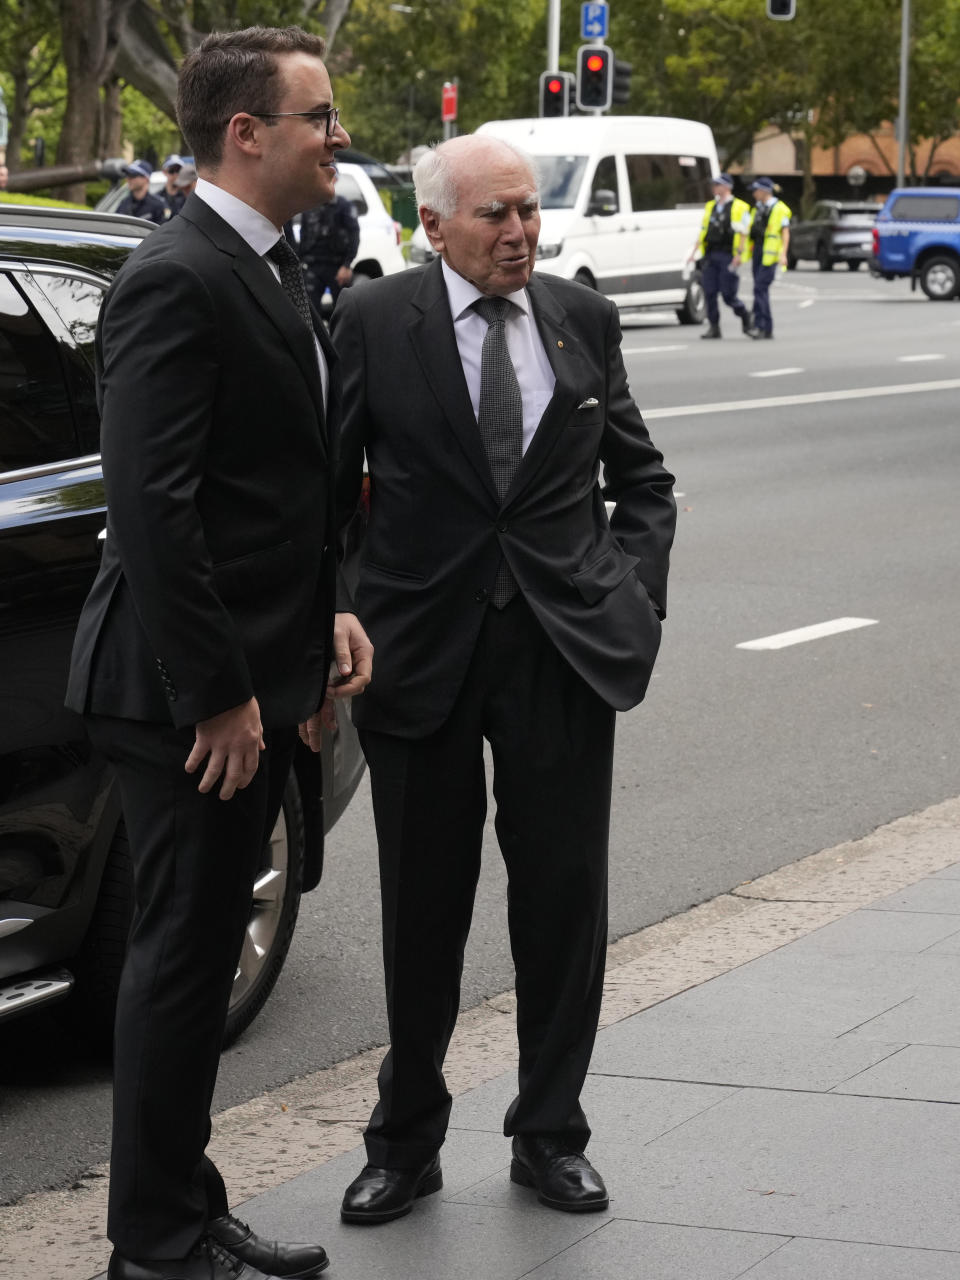 Former Australian Prime Minister John Howard, right, arrives for the funeral and interment of polarizing Cardinal George Pell is under way at St. Mary's Cathedral in Sydney, Thursday, Feb. 2, 2023. Pell, who died last month at age 81, spent more than a year in prison before his sex abuse convictions were overturned in 2020. (AP Photo/Rick Rycroft)